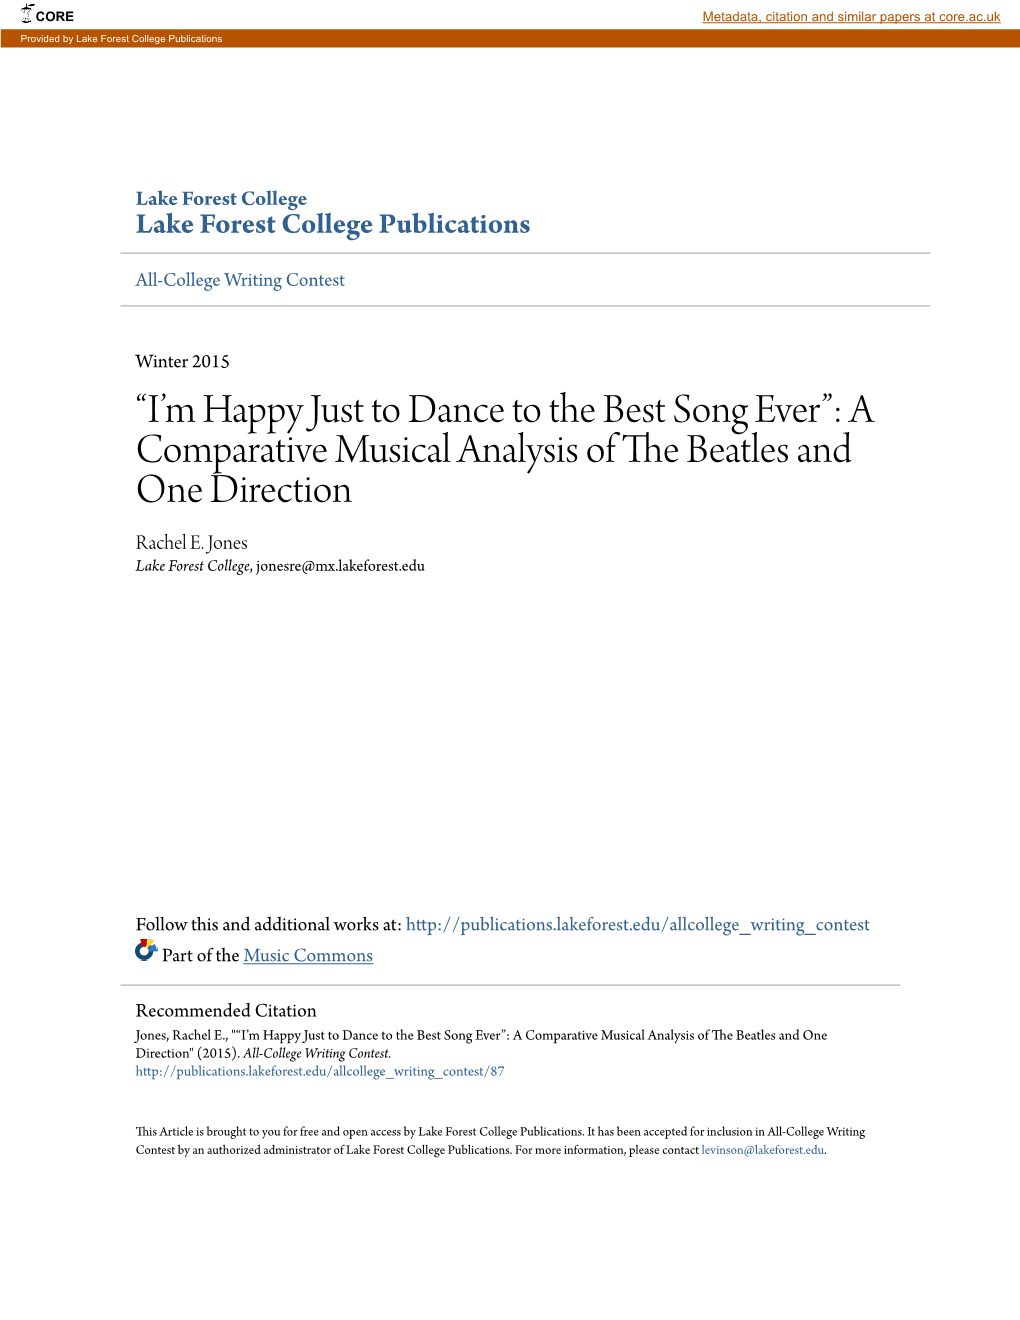 A Comparative Musical Analysis of the Beatles and One Direction Rachel E